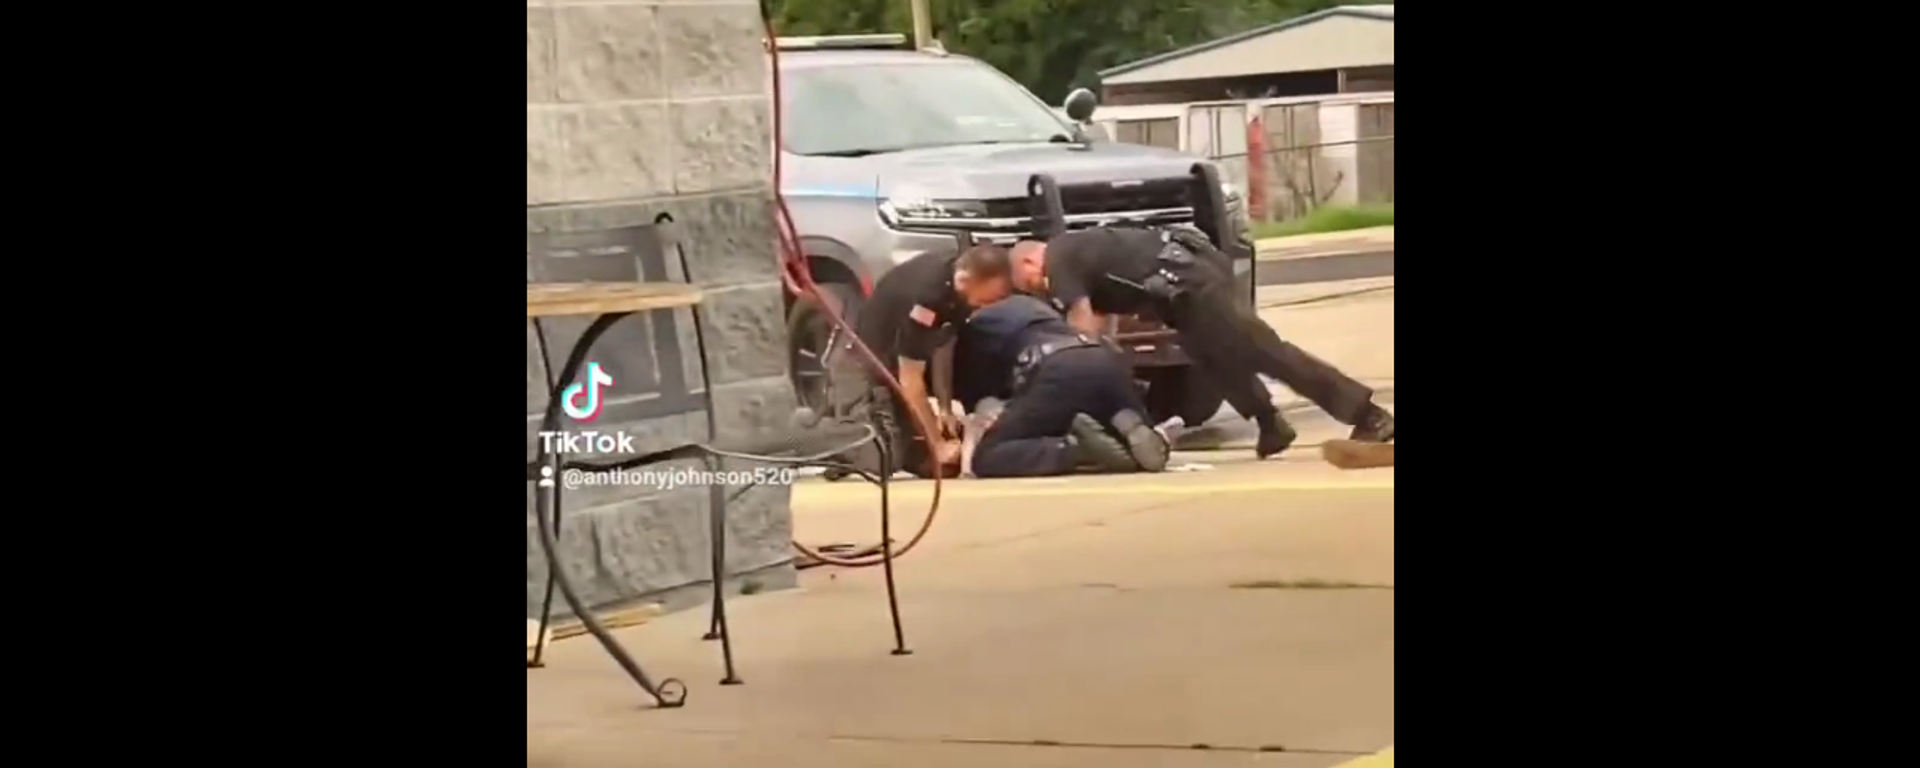 A screenshot from the video showing three police officers beating a man in Arkansas, August 21, 2022. - Sputnik International, 1920, 22.08.2022